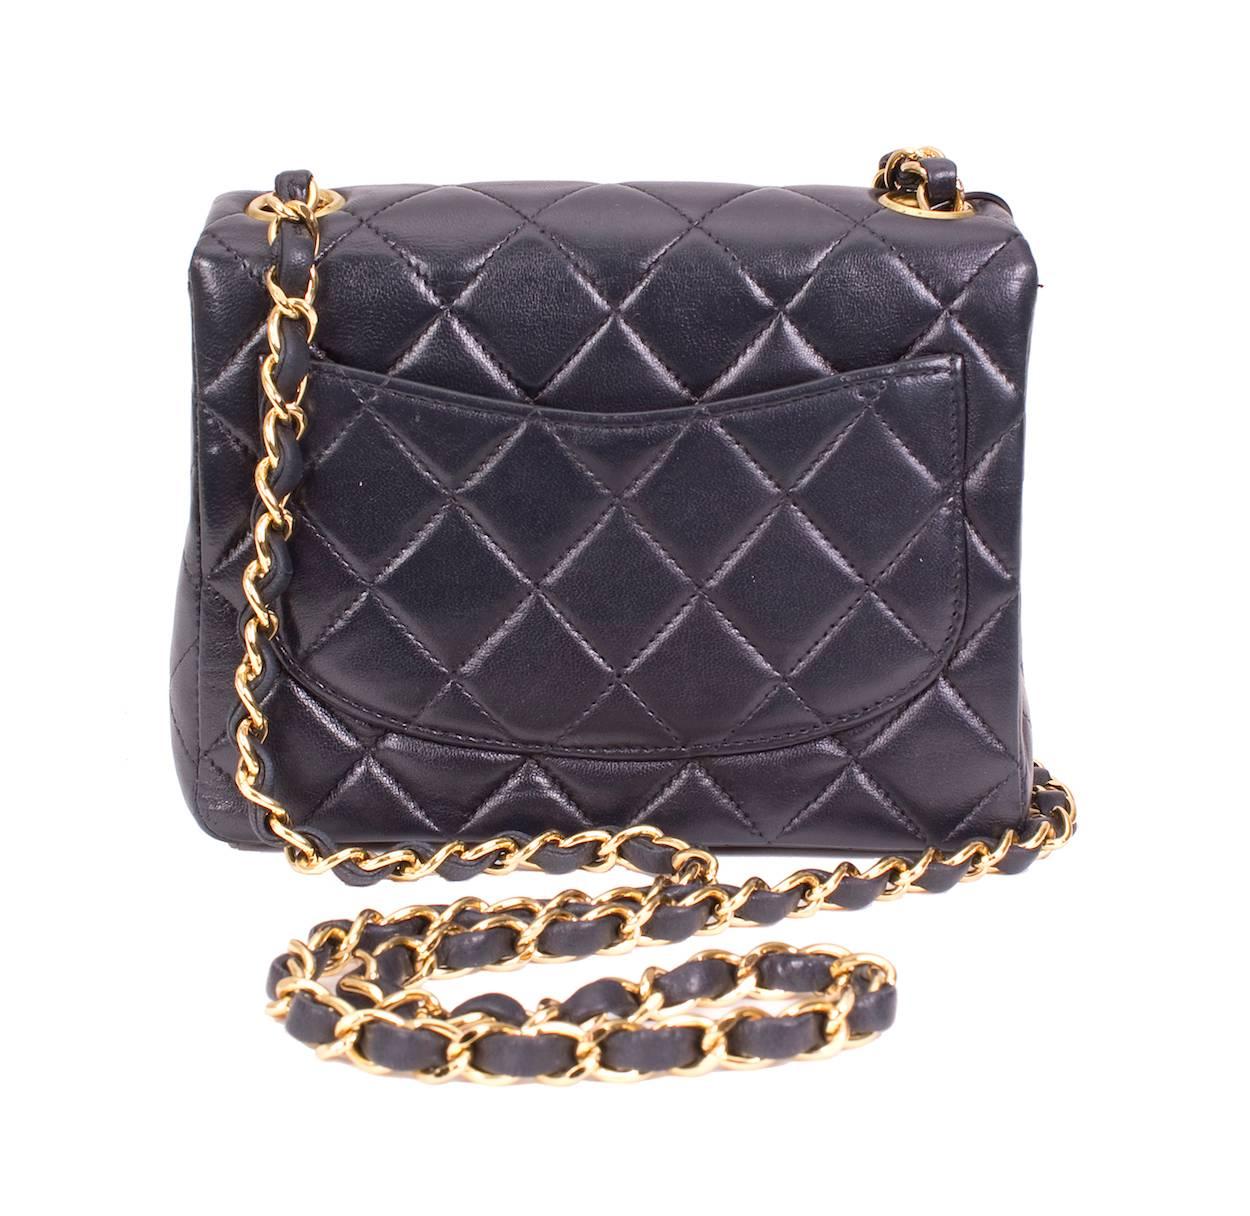 This is a navy blue quilted lambskin bag by Chanel from the year 2000.  
The dimensions are 6.5